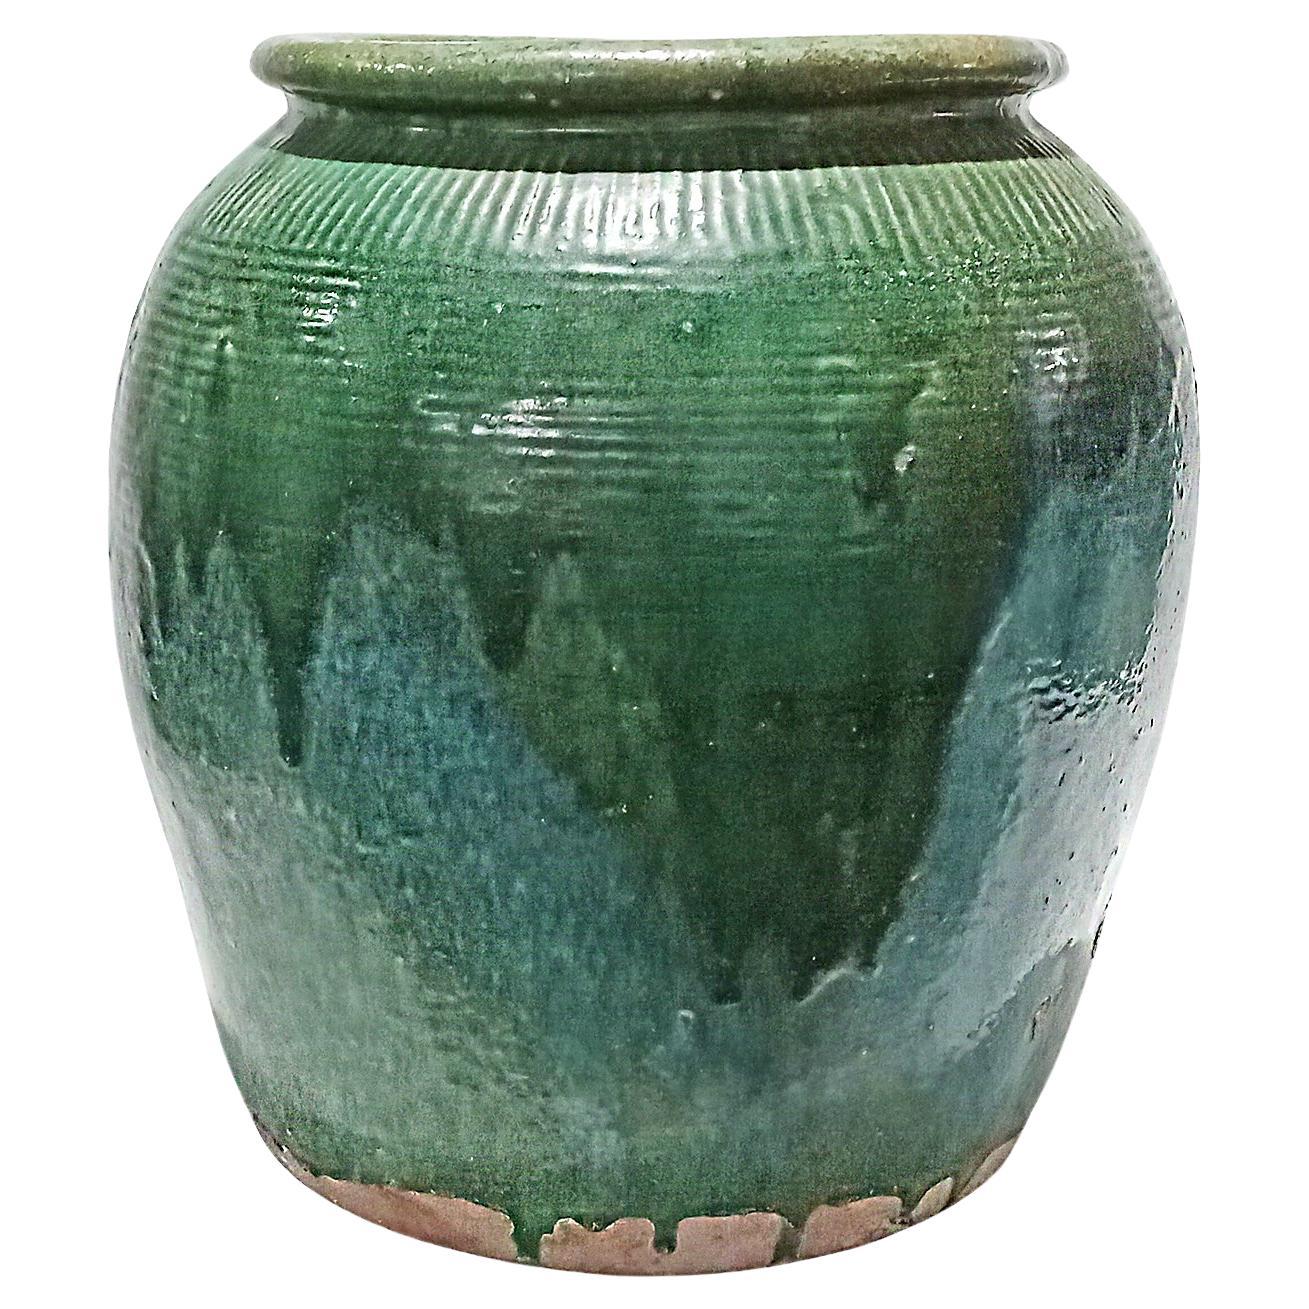 Balinese Terracotta Vase / Jar / Urn with Green Glaze, Contemporary For Sale